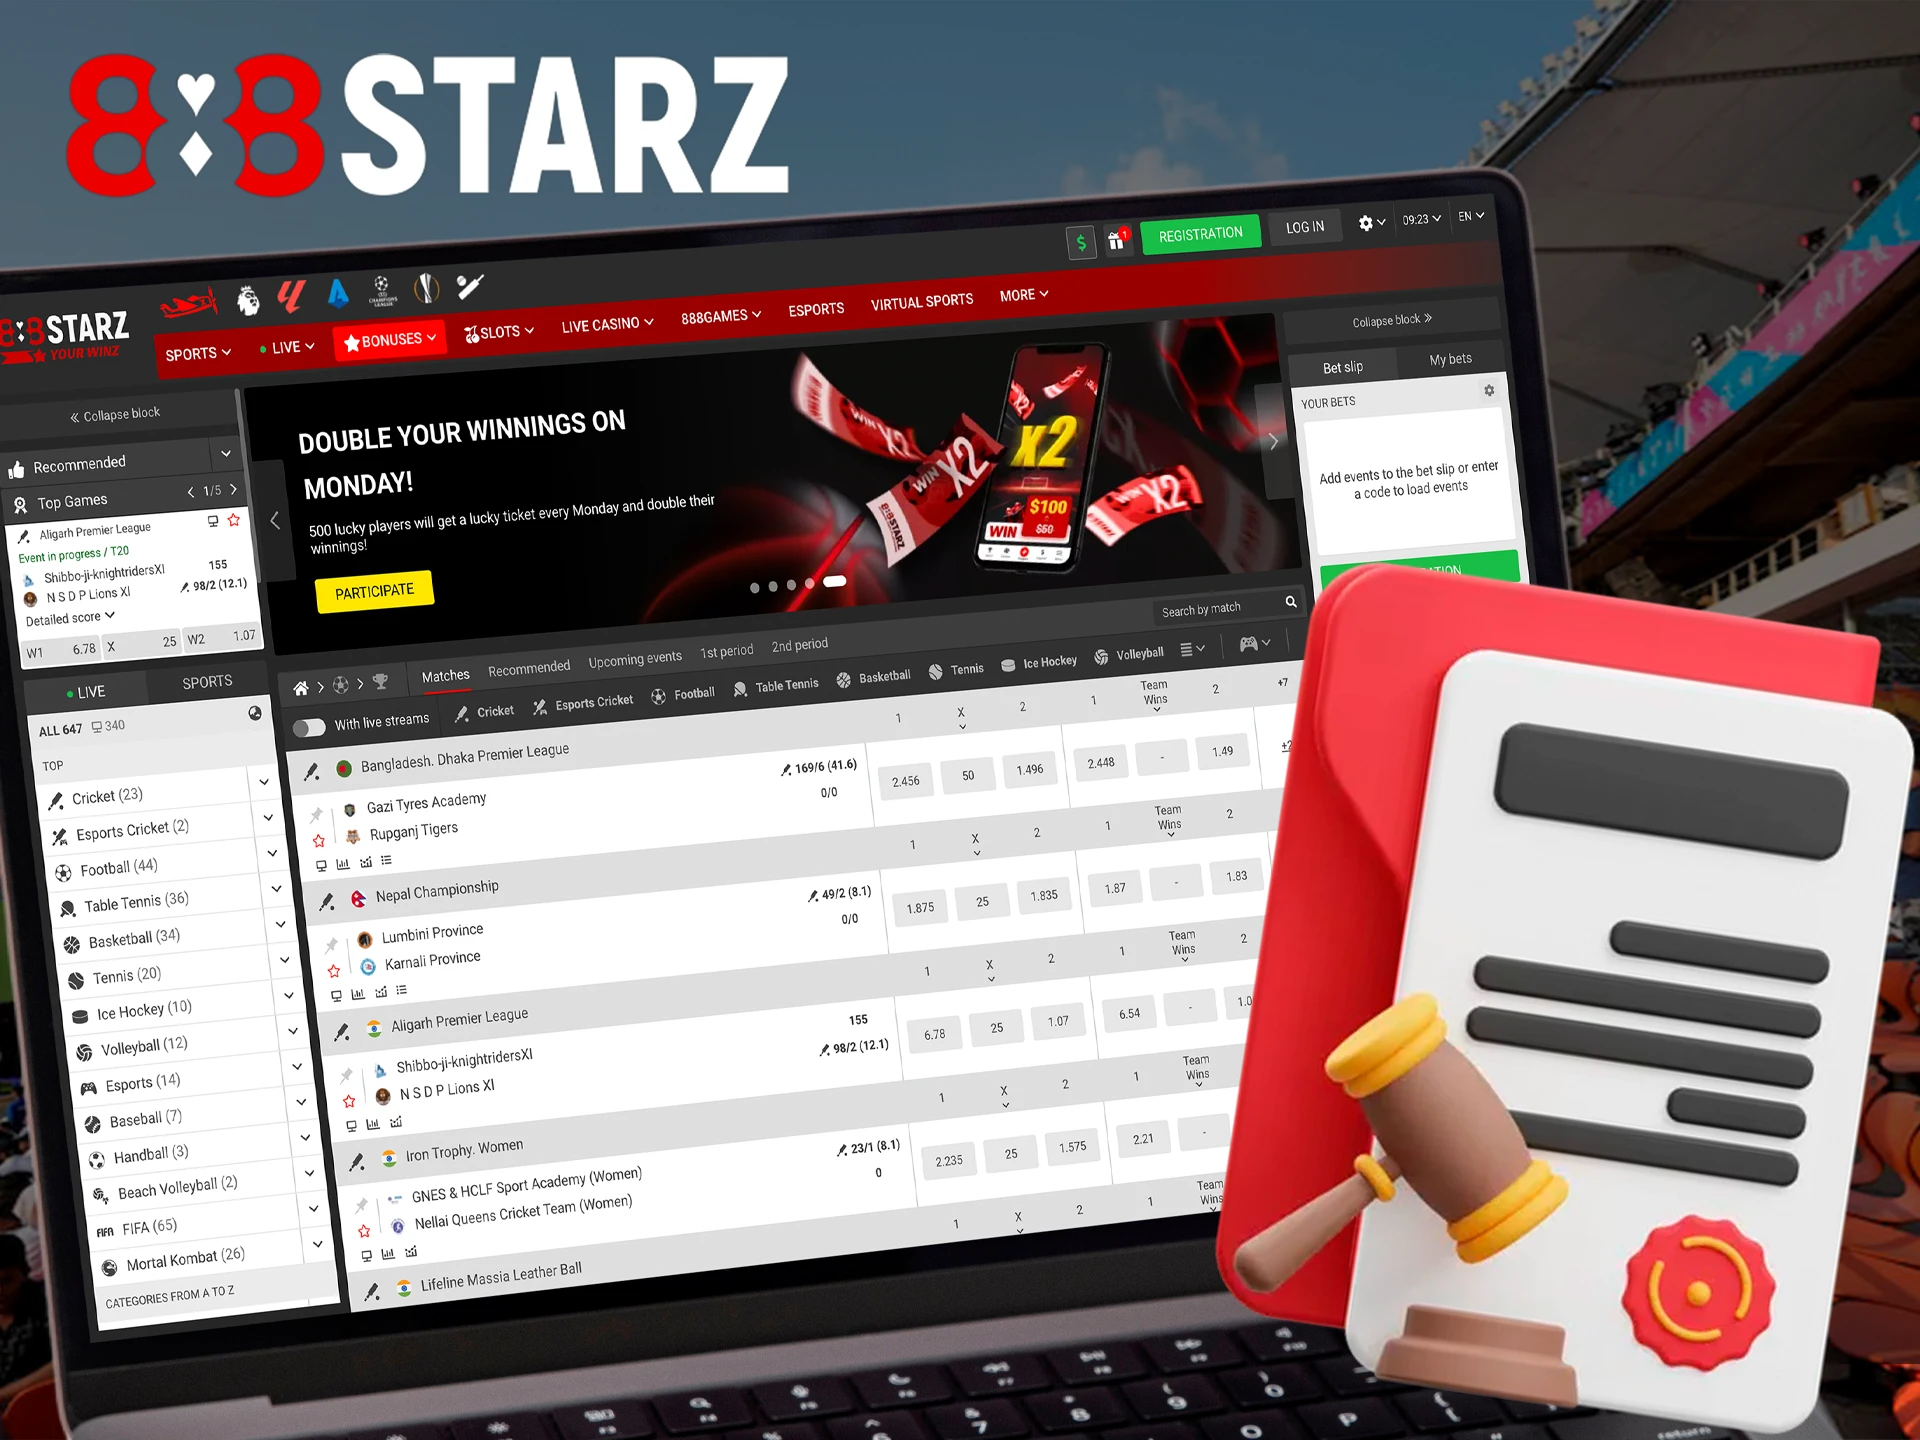 888Starz is completely legal and safe for online betting and gaming in India with a Curaçao license